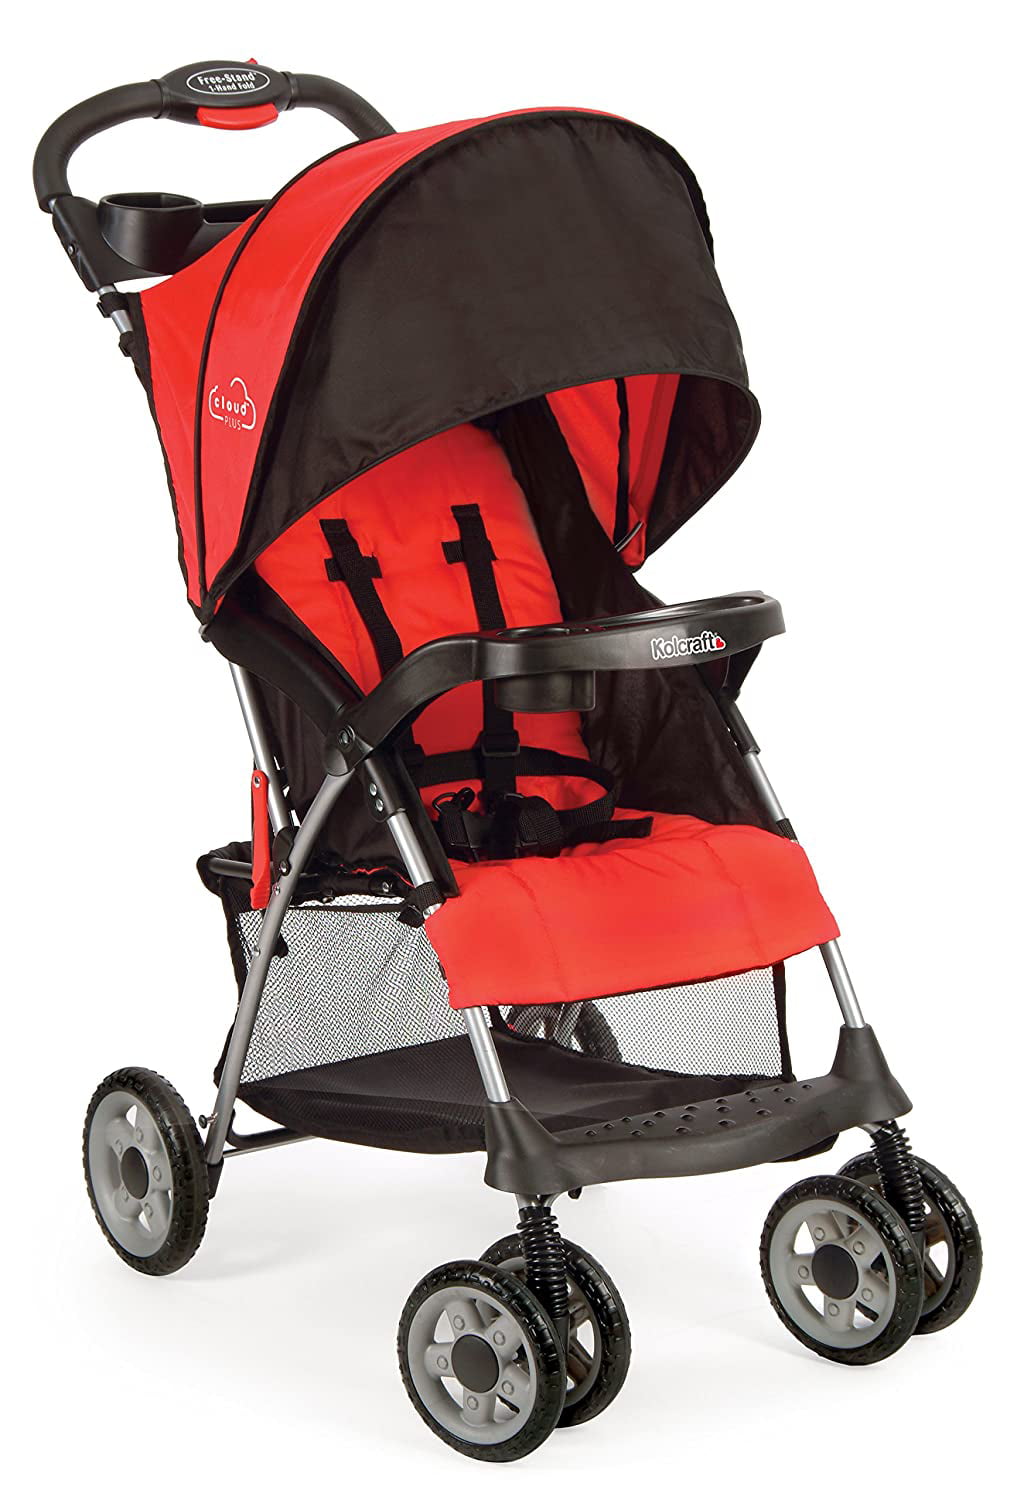 Kolcraft Cloud Plus Lightweight Easy Fold Compact Travel Baby Stroller, Fire Red